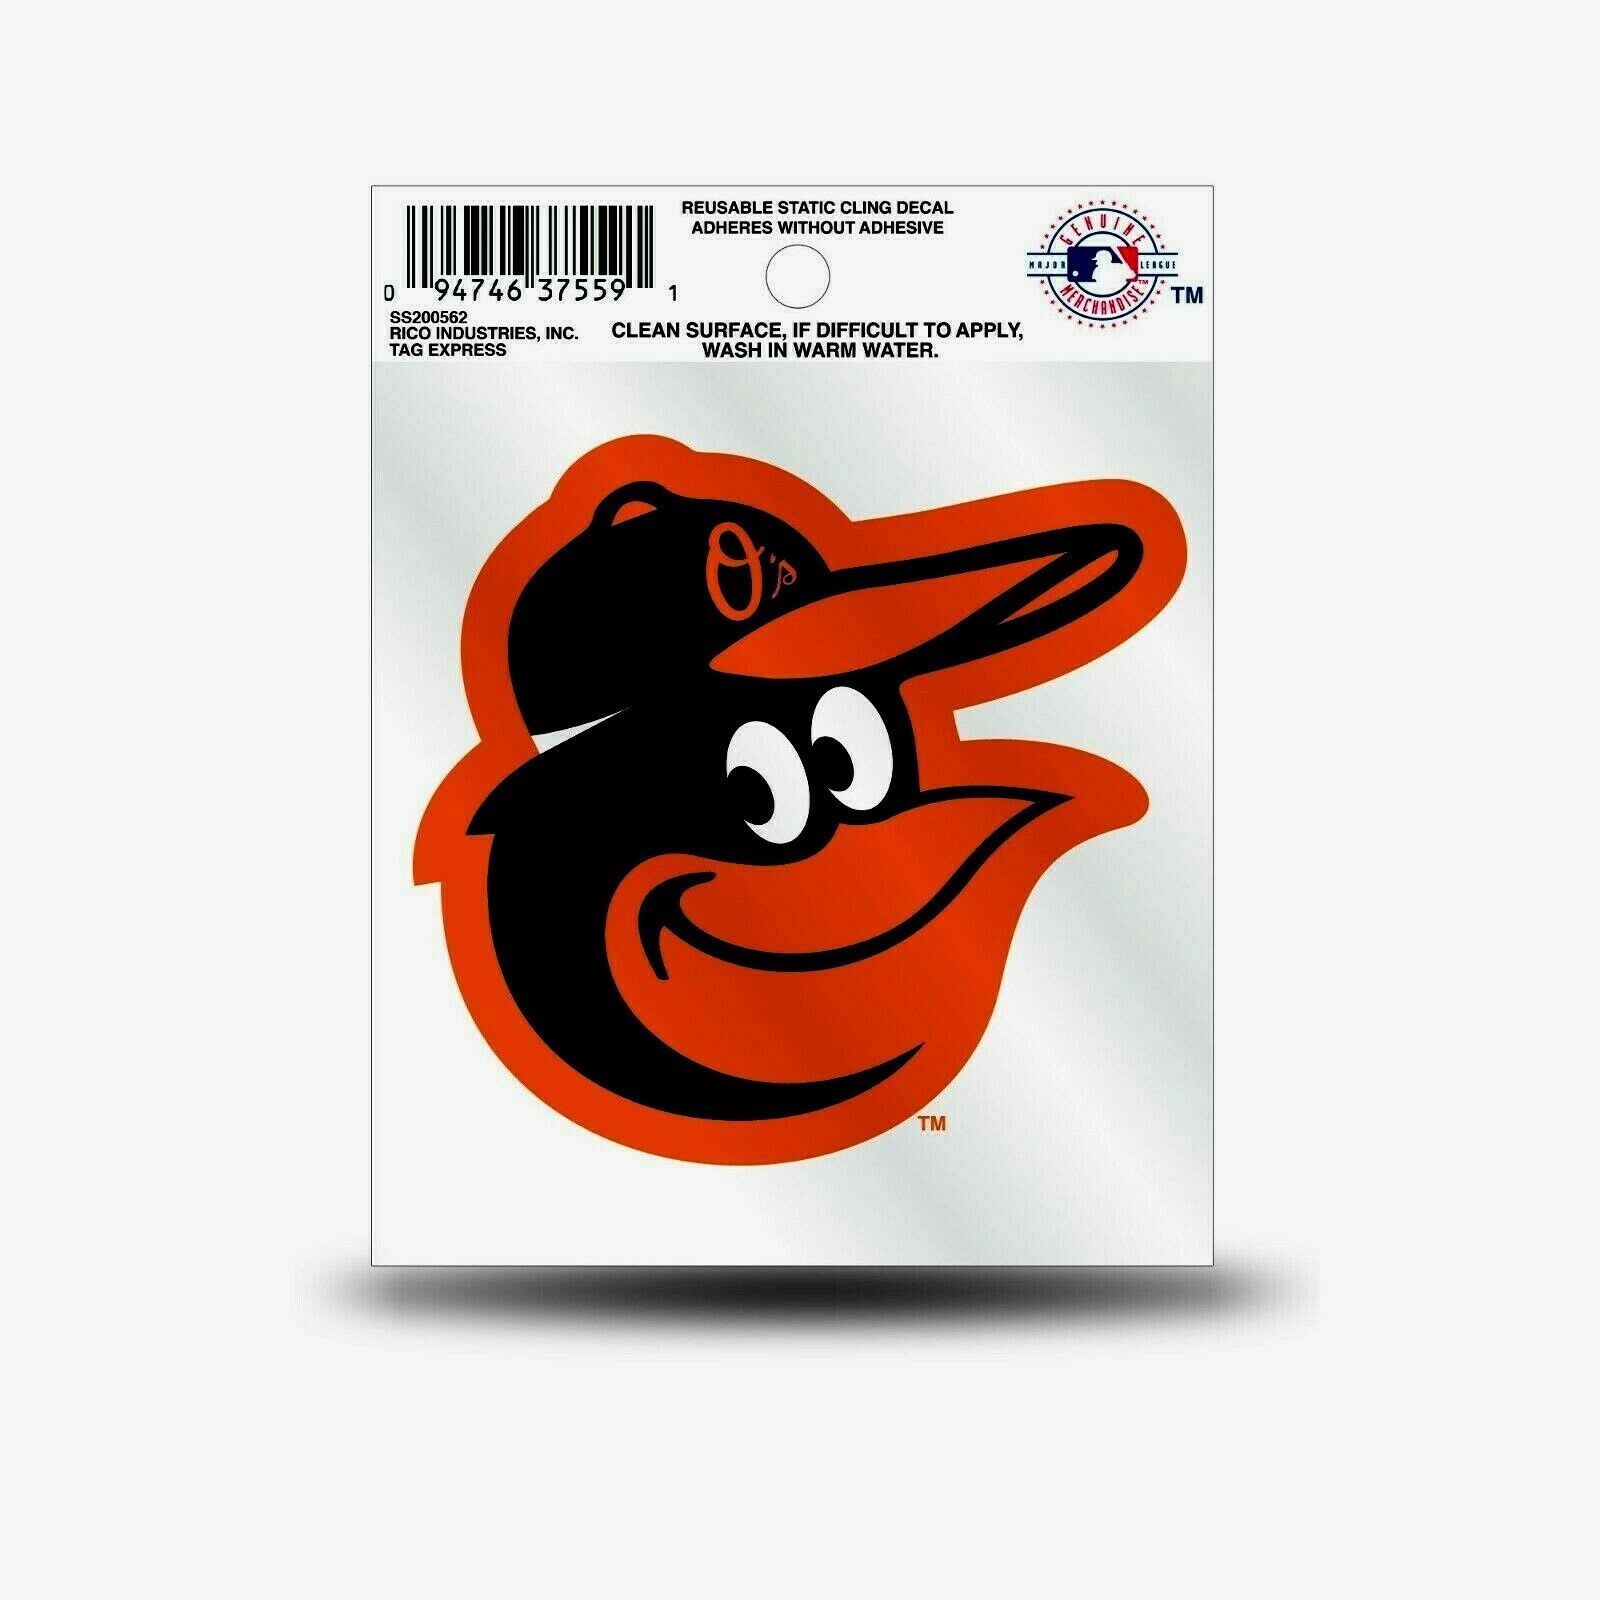 Primary image for BALTIMORE ORIOLES LOGO REUSABLE STATIC CLING DECAL NEW & OFFICIALLY LICENSED